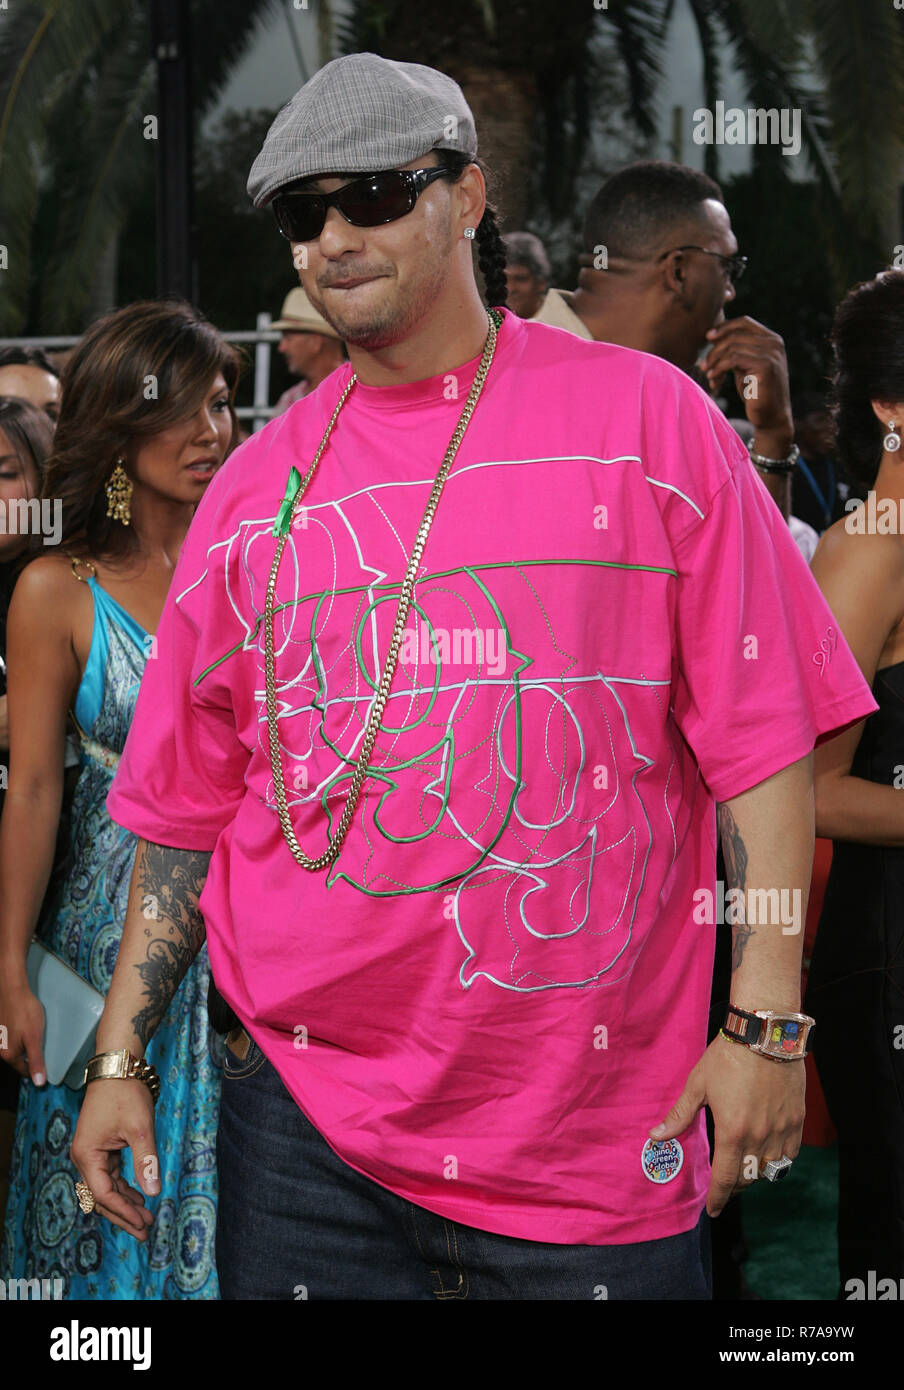 Don Dinero arrives for the 2007 Latin Billboard Awards at the BankUnited Center in Coral Gables, Florida on April 26, 2007. Stock Photo